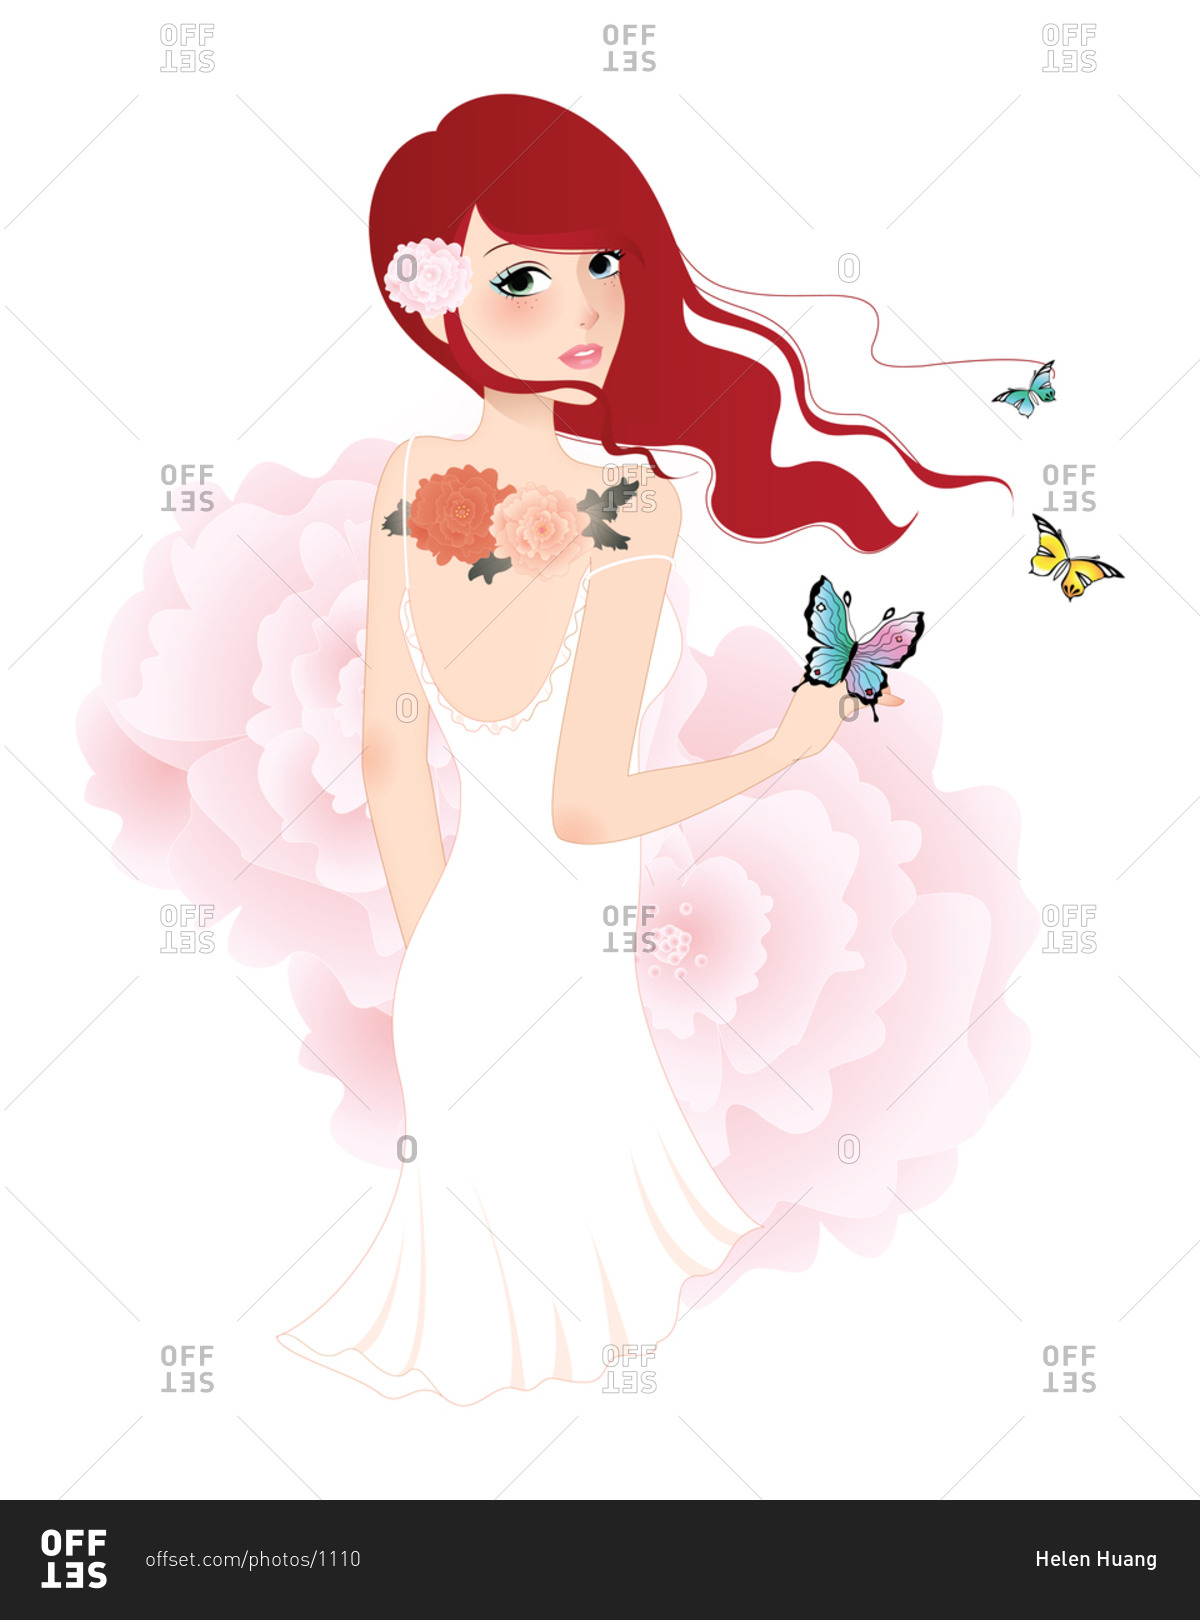 A red-haired young woman with flower tattoos surrounded by butterflies